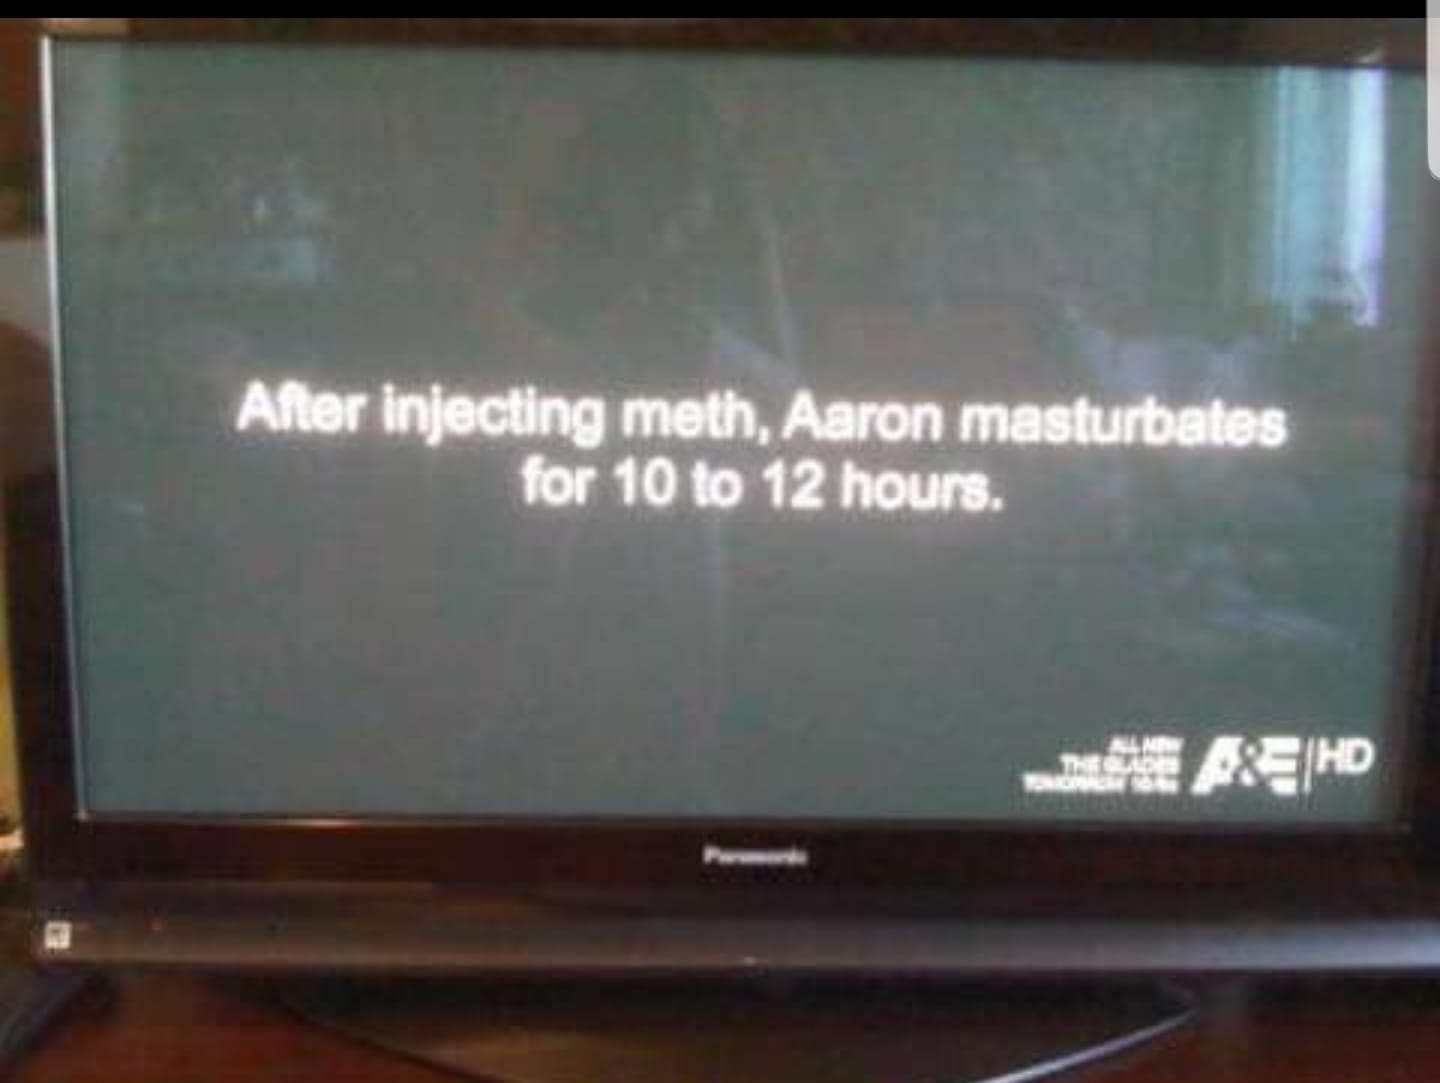 after injecting meth aaron - After injecting meth, Aaron masturbates for 10 to 12 hours. AHd